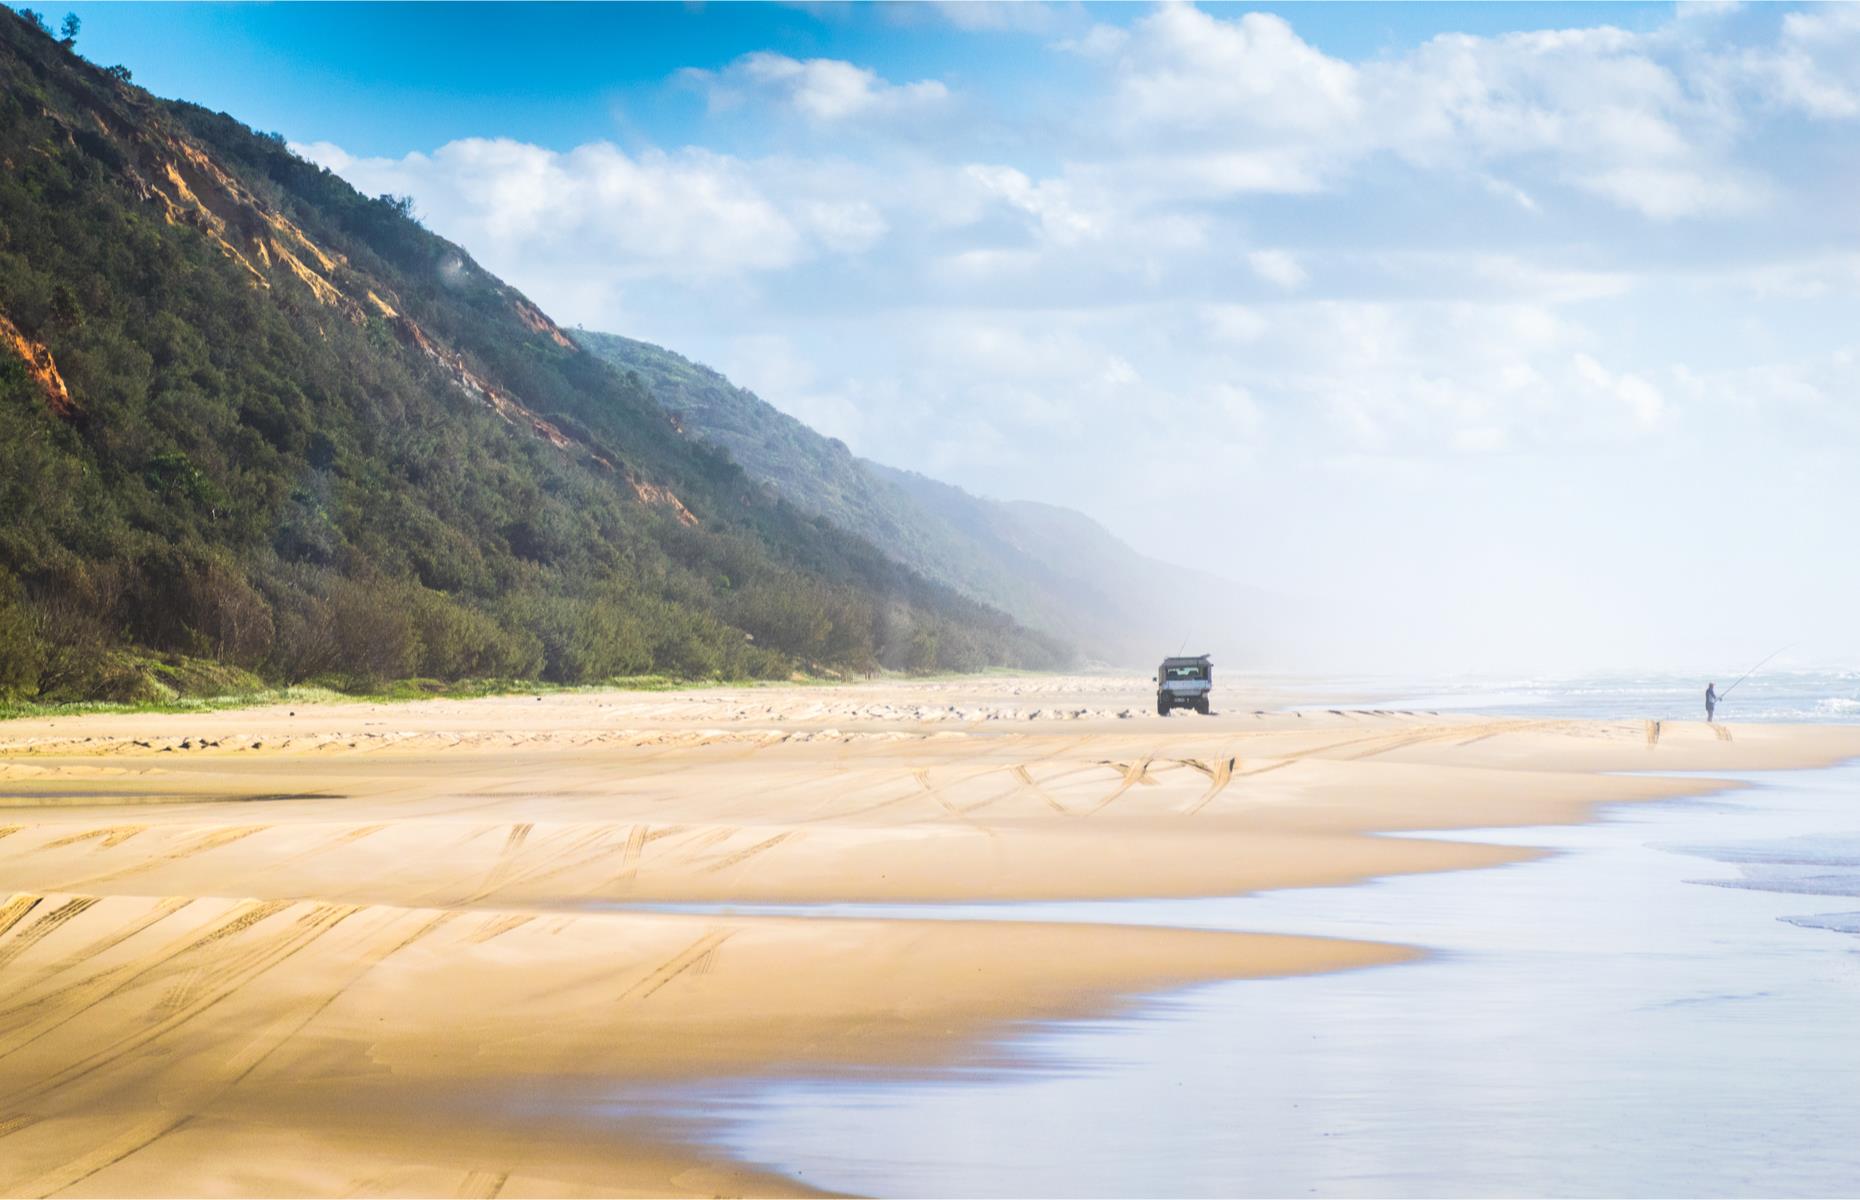 <p>There are beach roads and then there are actual beach roads. Follow the 236-mile (380km) <a href="https://www.queensland.com/au/en/plan-your-holiday/road-trips/great-beach-drive-road-trip-5-days">Great Beach Drive</a> to quite literally track your way along the sand on Queensland's sandy highways. Start in Noosa, where you’ll need to hire a four-wheel drive (make sure the right vehicle access permits are included), then cross Noosa River on the vehicle ferry at Tewantin. From here, take the third beach access road and hit the sands. You’ll go through the Great Sandy Strait Biosphere – stop at Teewah Beach to marvel at its multicolored sand cliffs then carry on north on the Leisha Track to cut through the sand dunes to the small coastal resort of Rainbow Beach. </p>